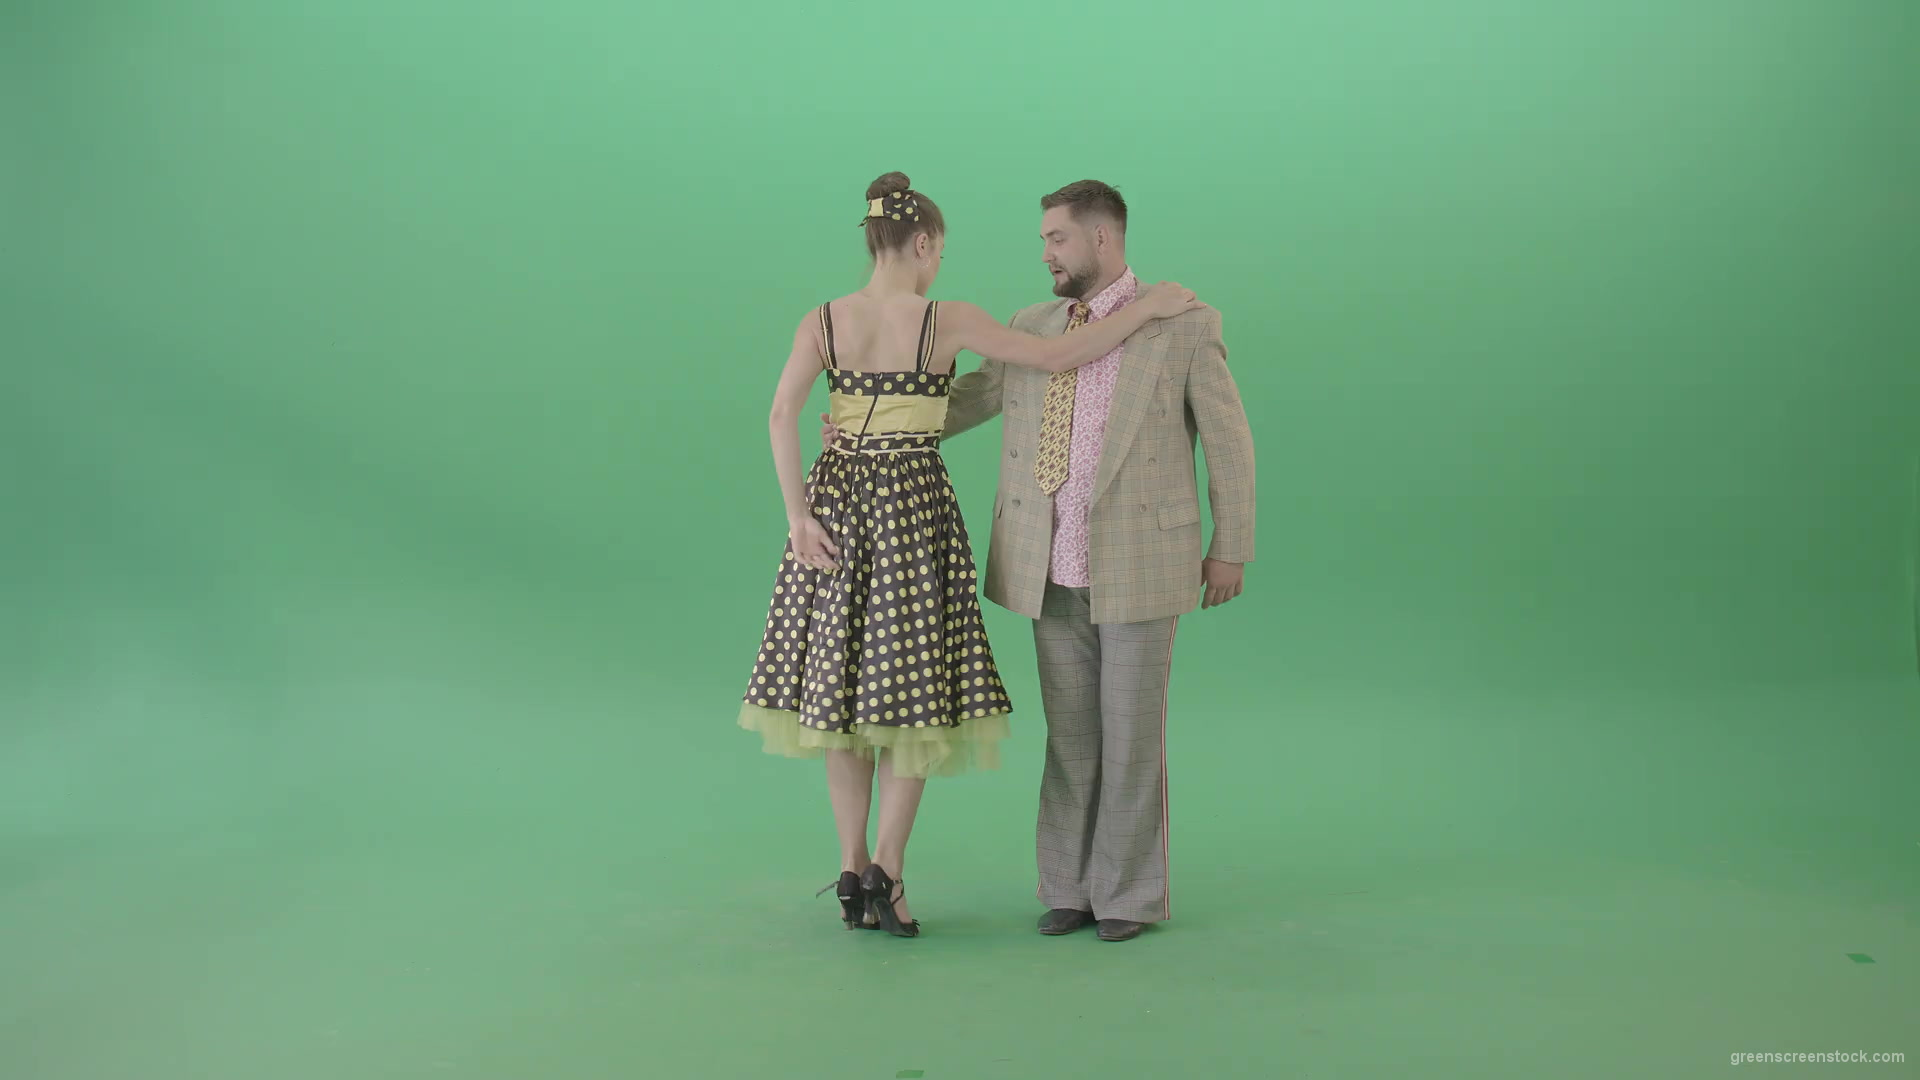 Amazing-couple-dance-Lindy-Hop-and-Rock-and-Roll-isolated-on-Green-Screen-4K-Video-Footage-1920_001 Green Screen Stock